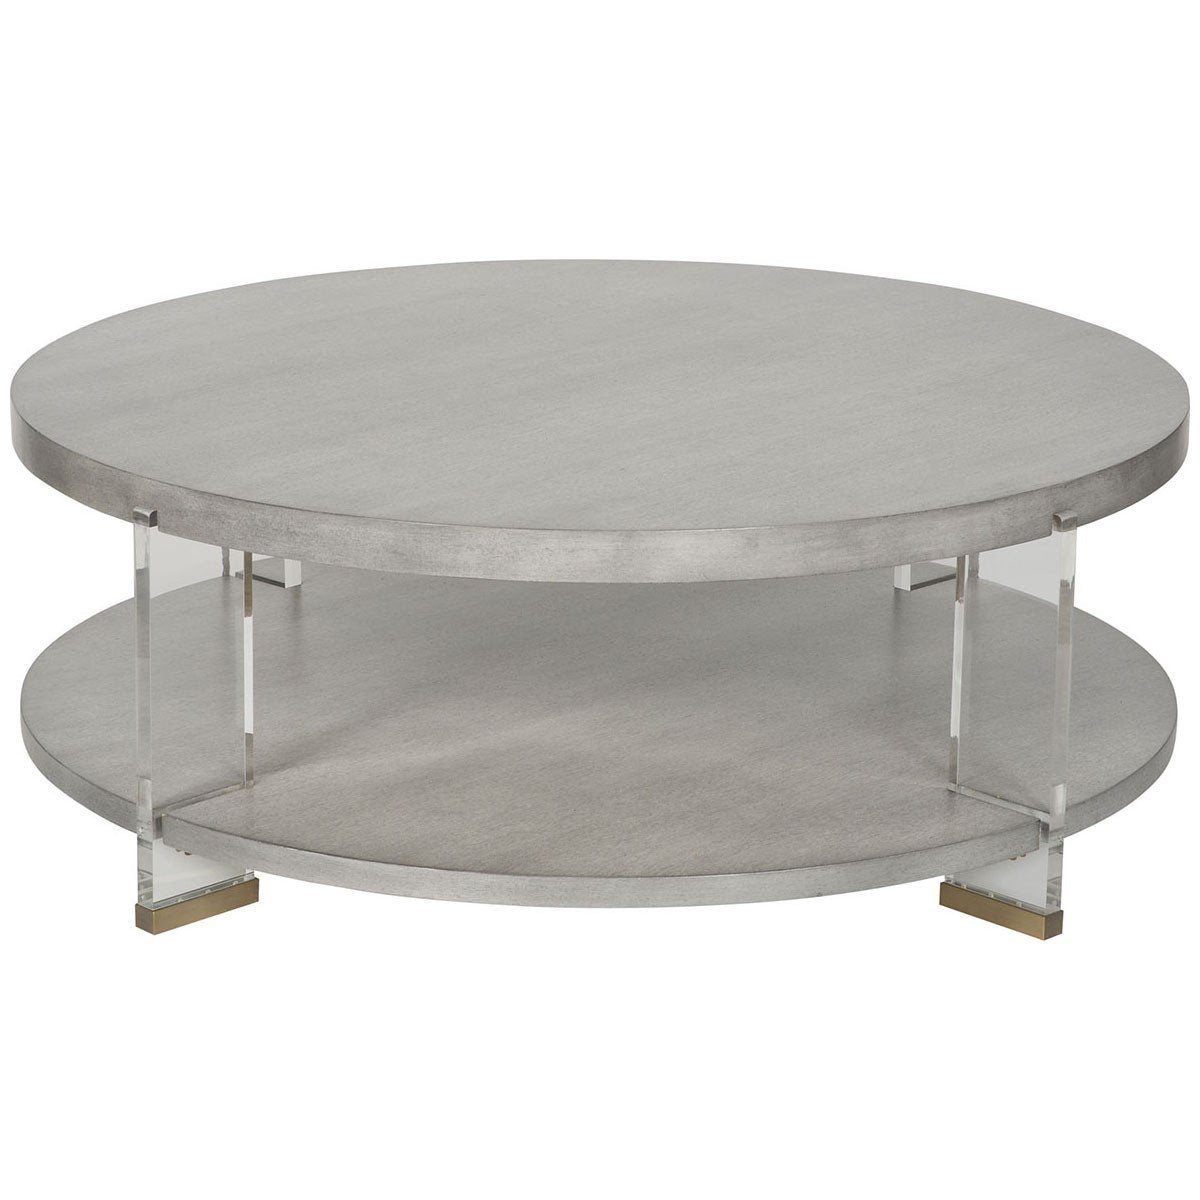 Vanguard Furniture, Dell Rey Round Cocktail Table, Mozambique Veneers ...